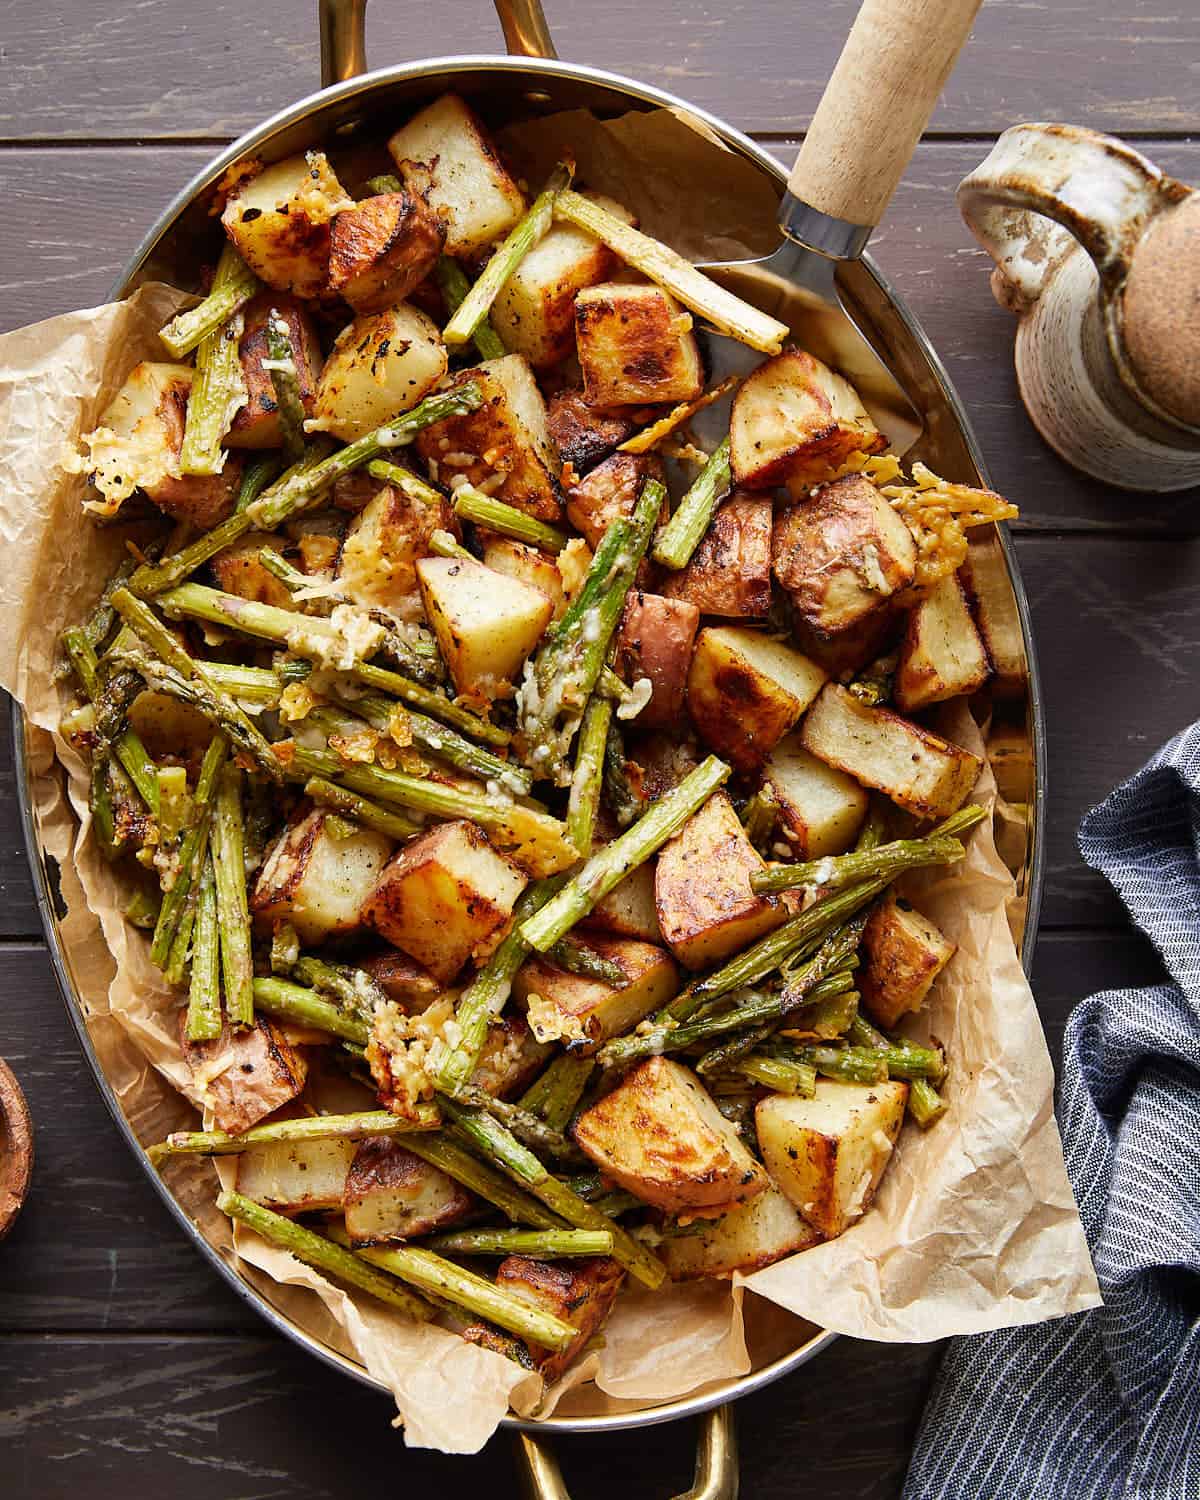 Overhead image of roasted potatoes and asparagus with garnish.